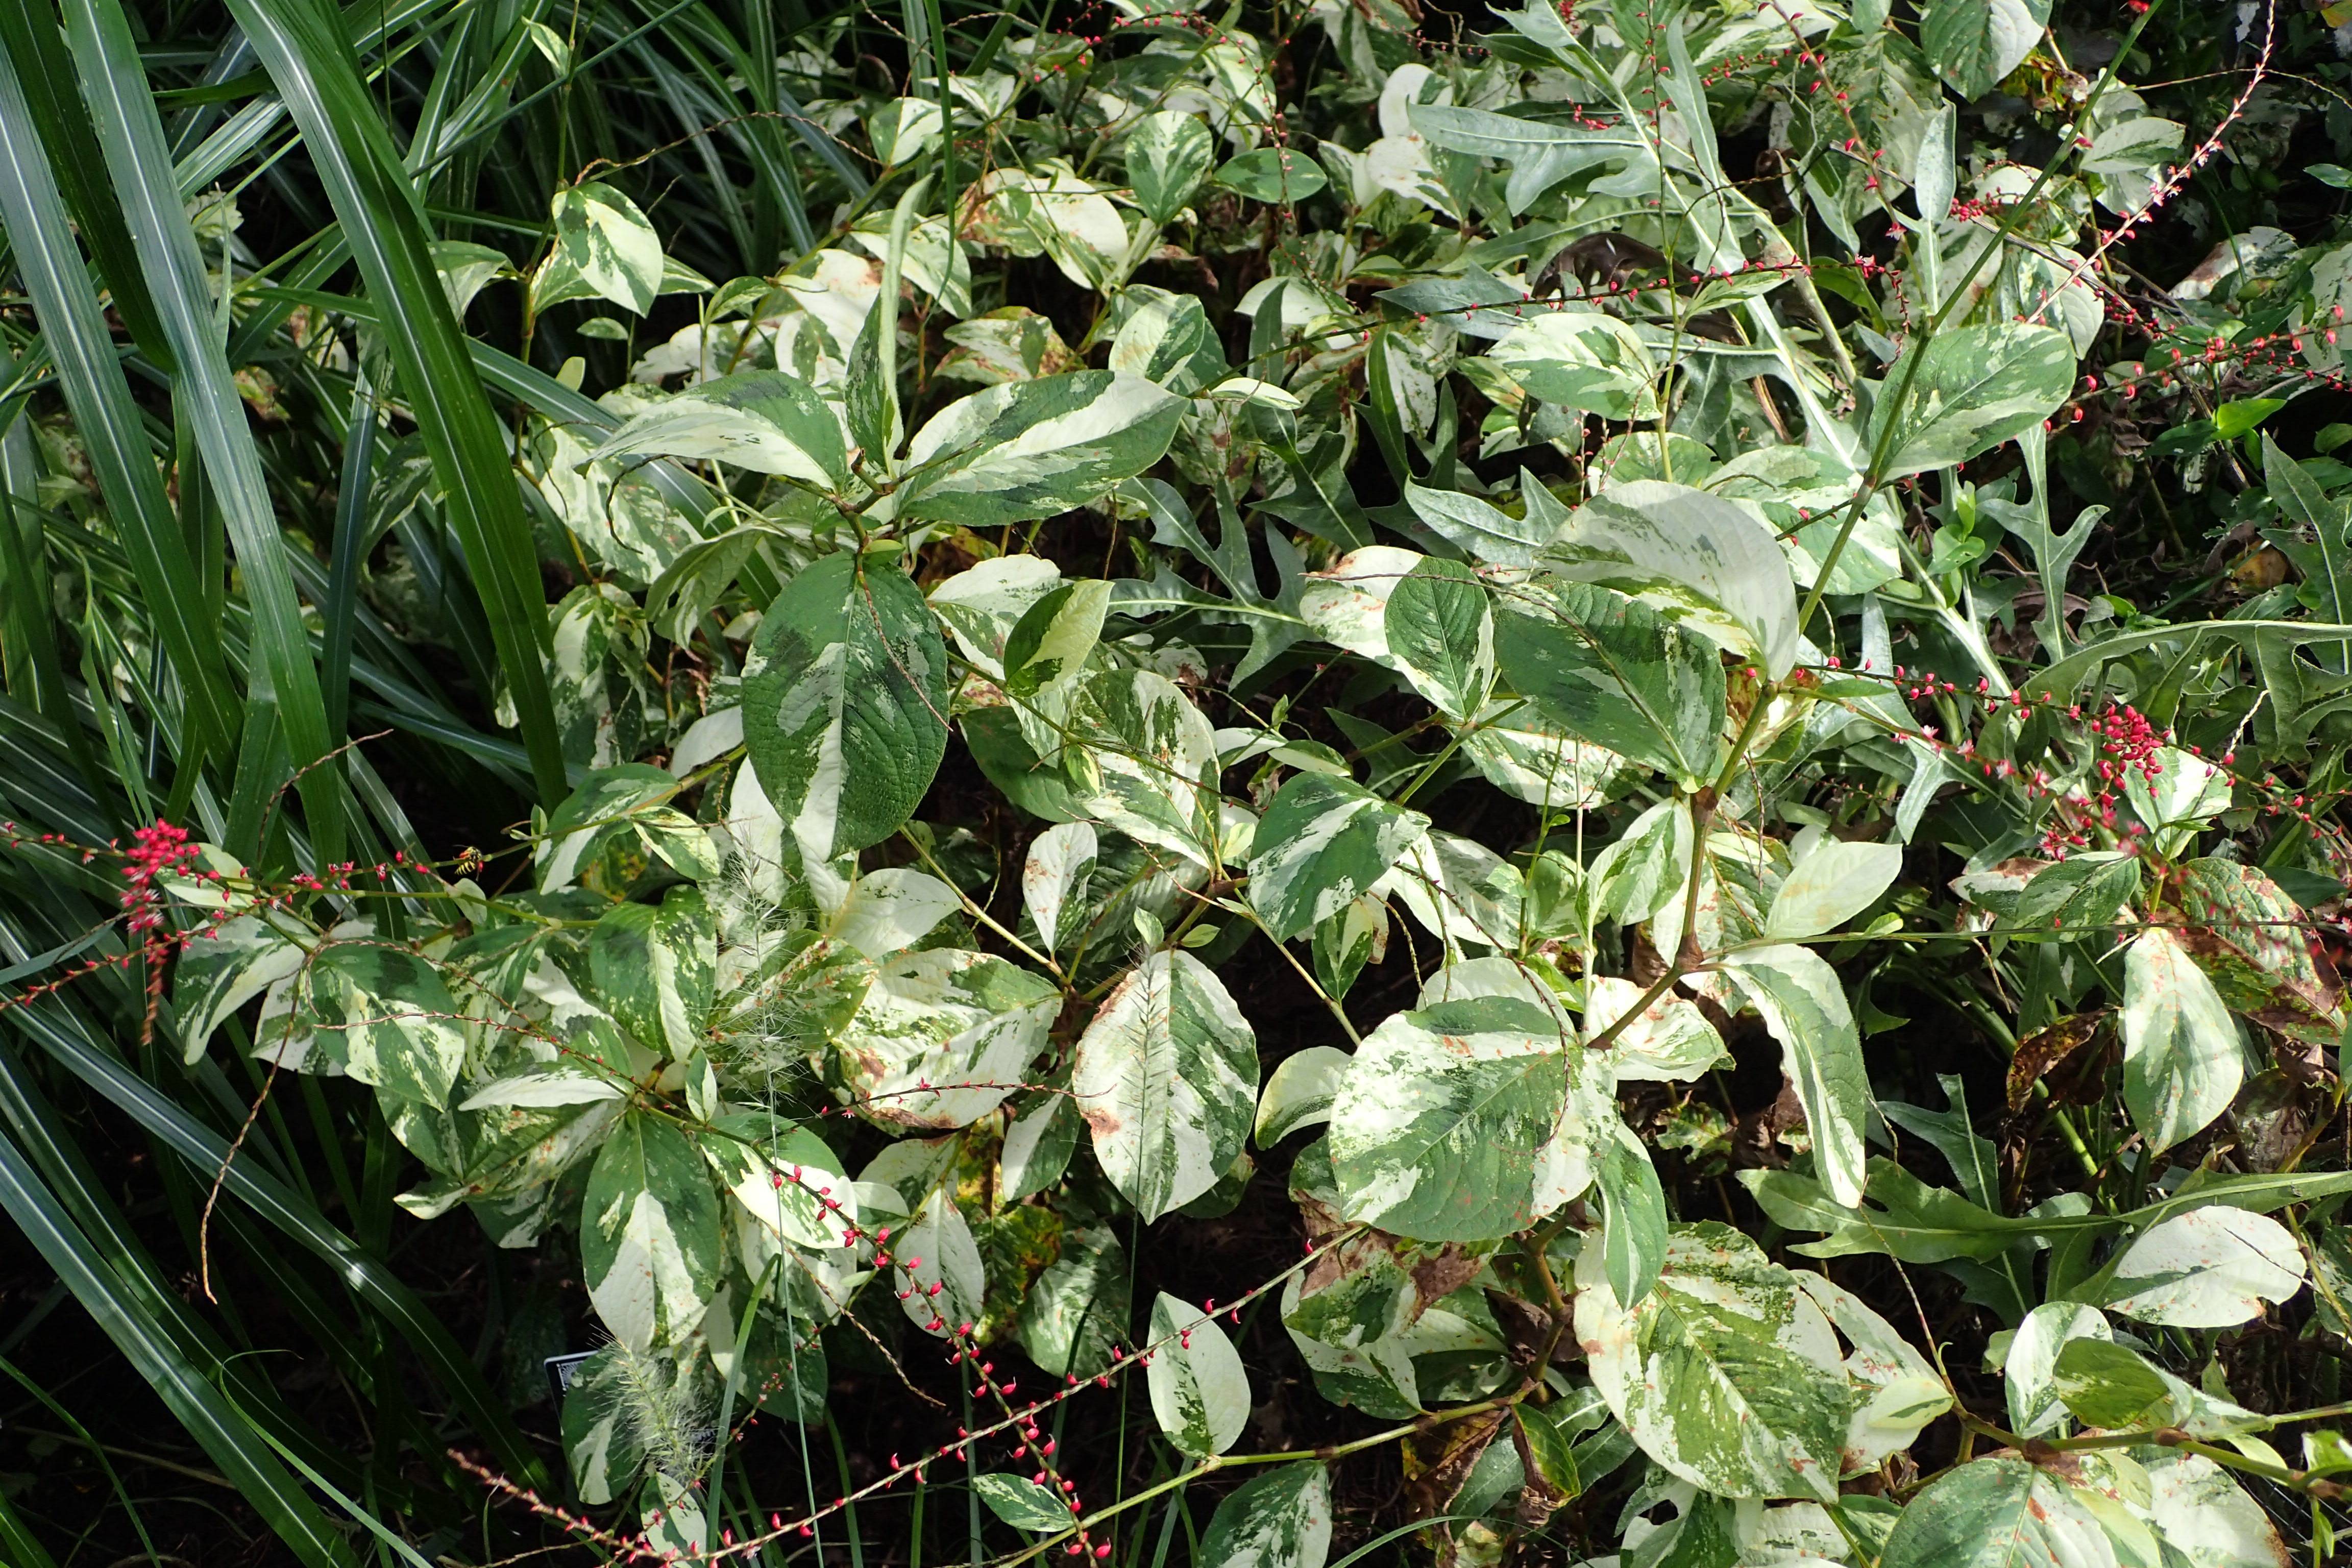 arrowhead-shaped, green-white, shiny leaves with green stems